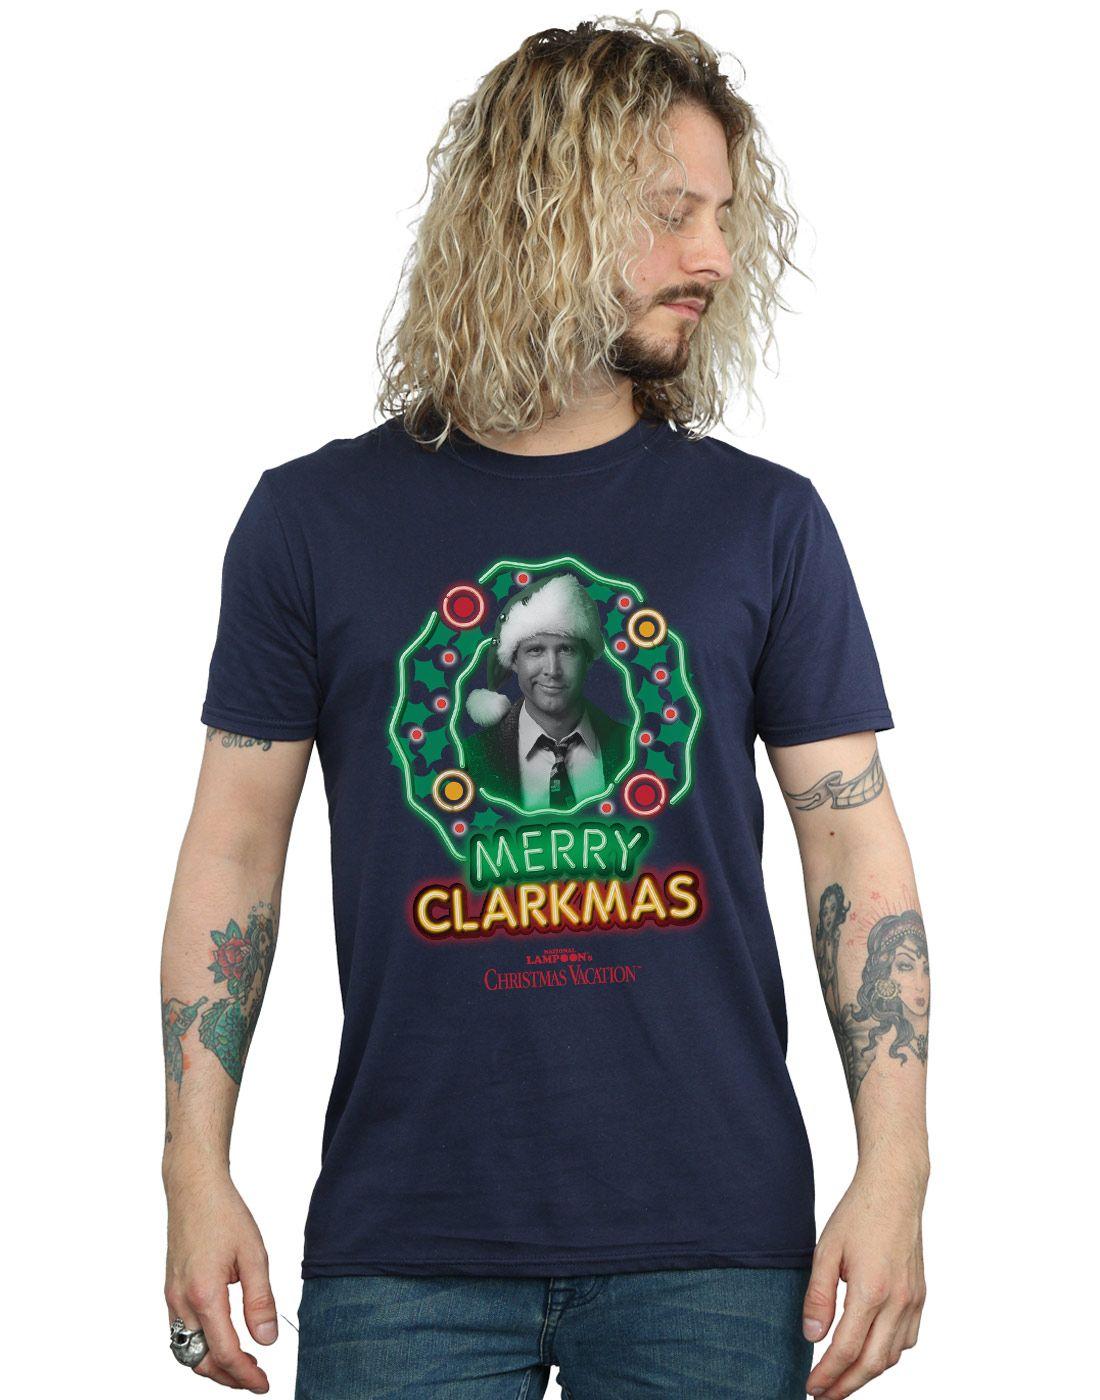 eBay Greyscale Logo - Details About National Lampoon's Christmas Vacation Men's Greyscale Clarkmas T Shirt